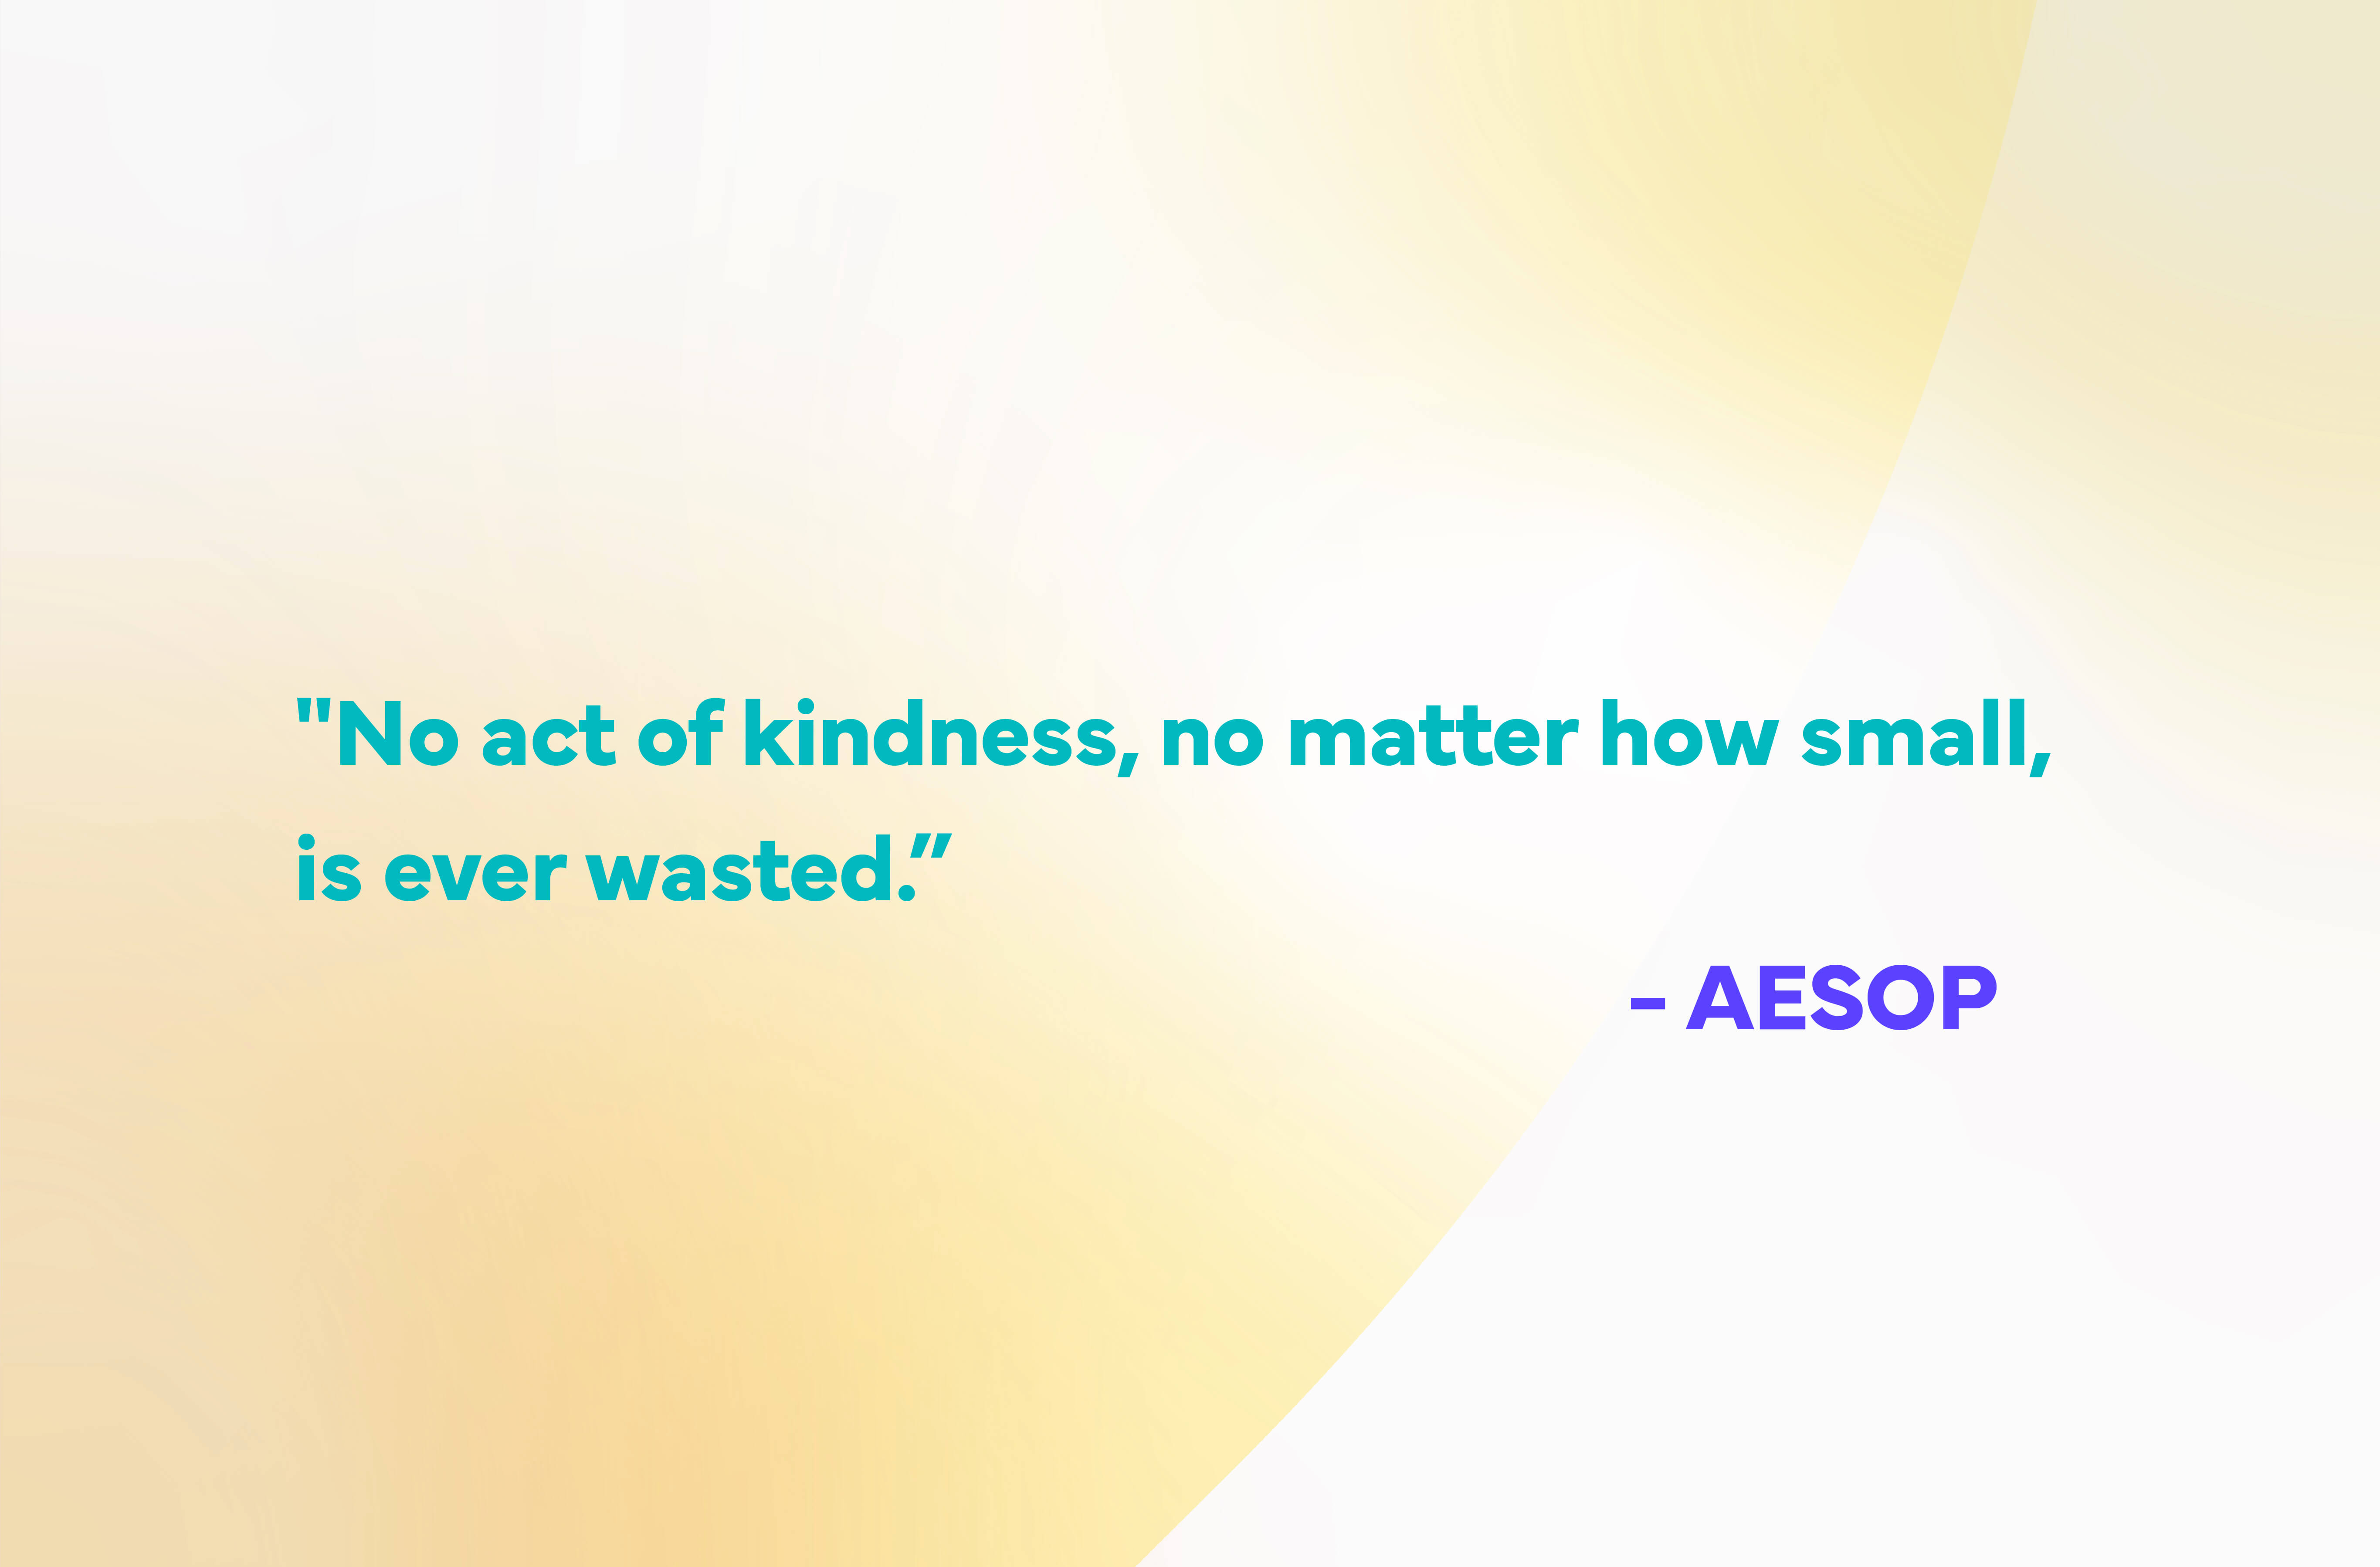 Volunteer-Quotes-aesop no act of kindness is ever wasted (8)-1